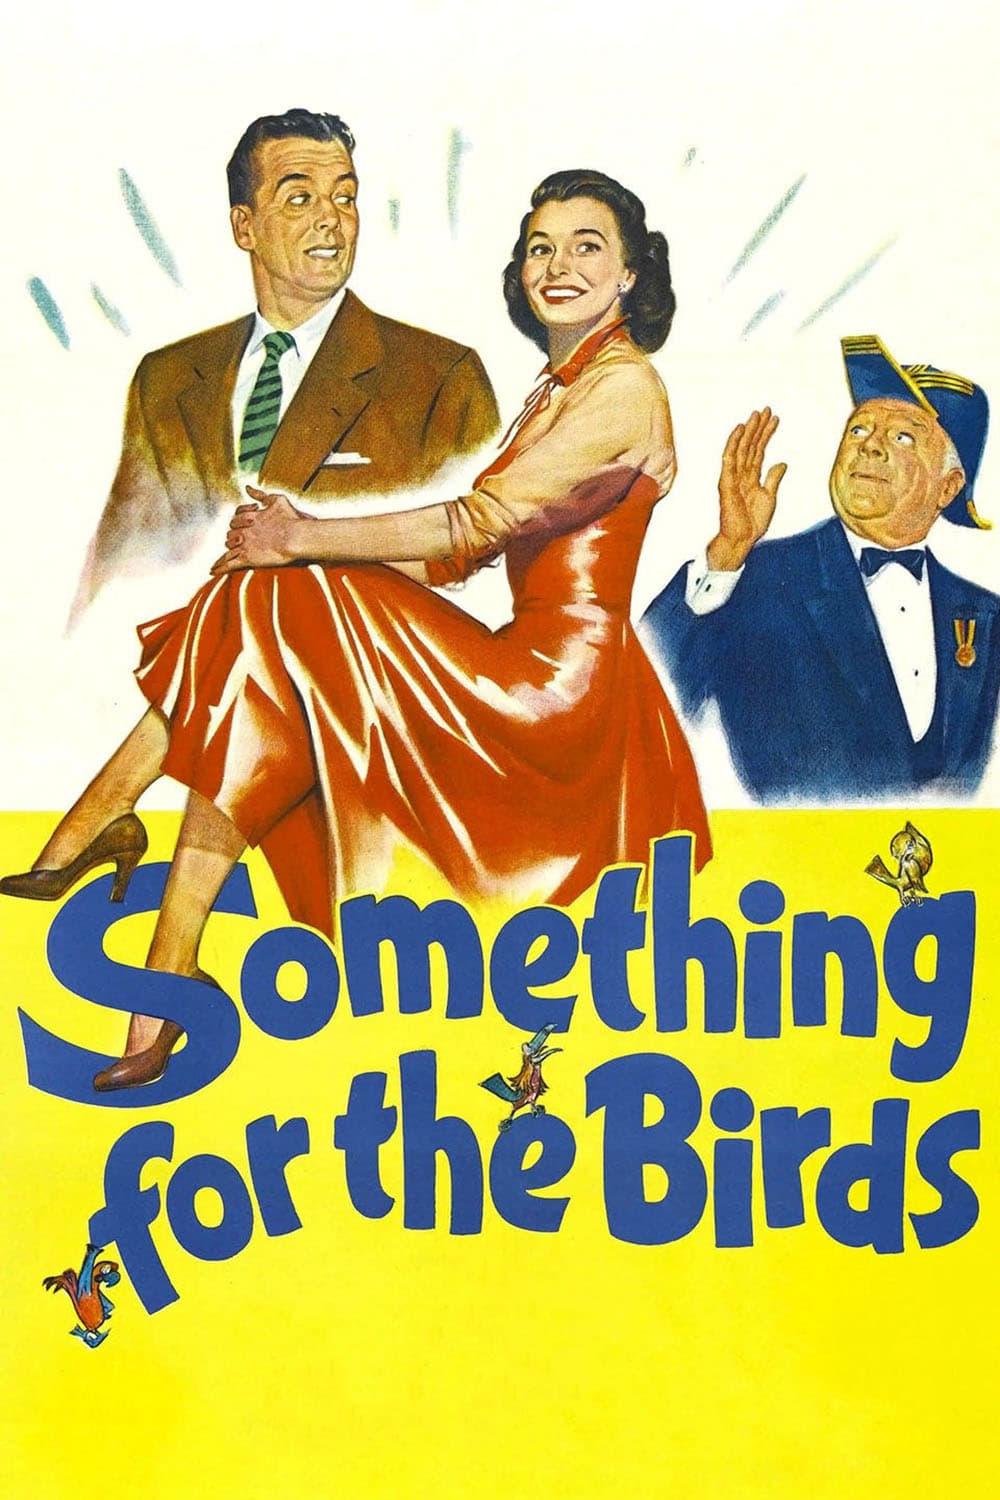 Something for the Birds poster